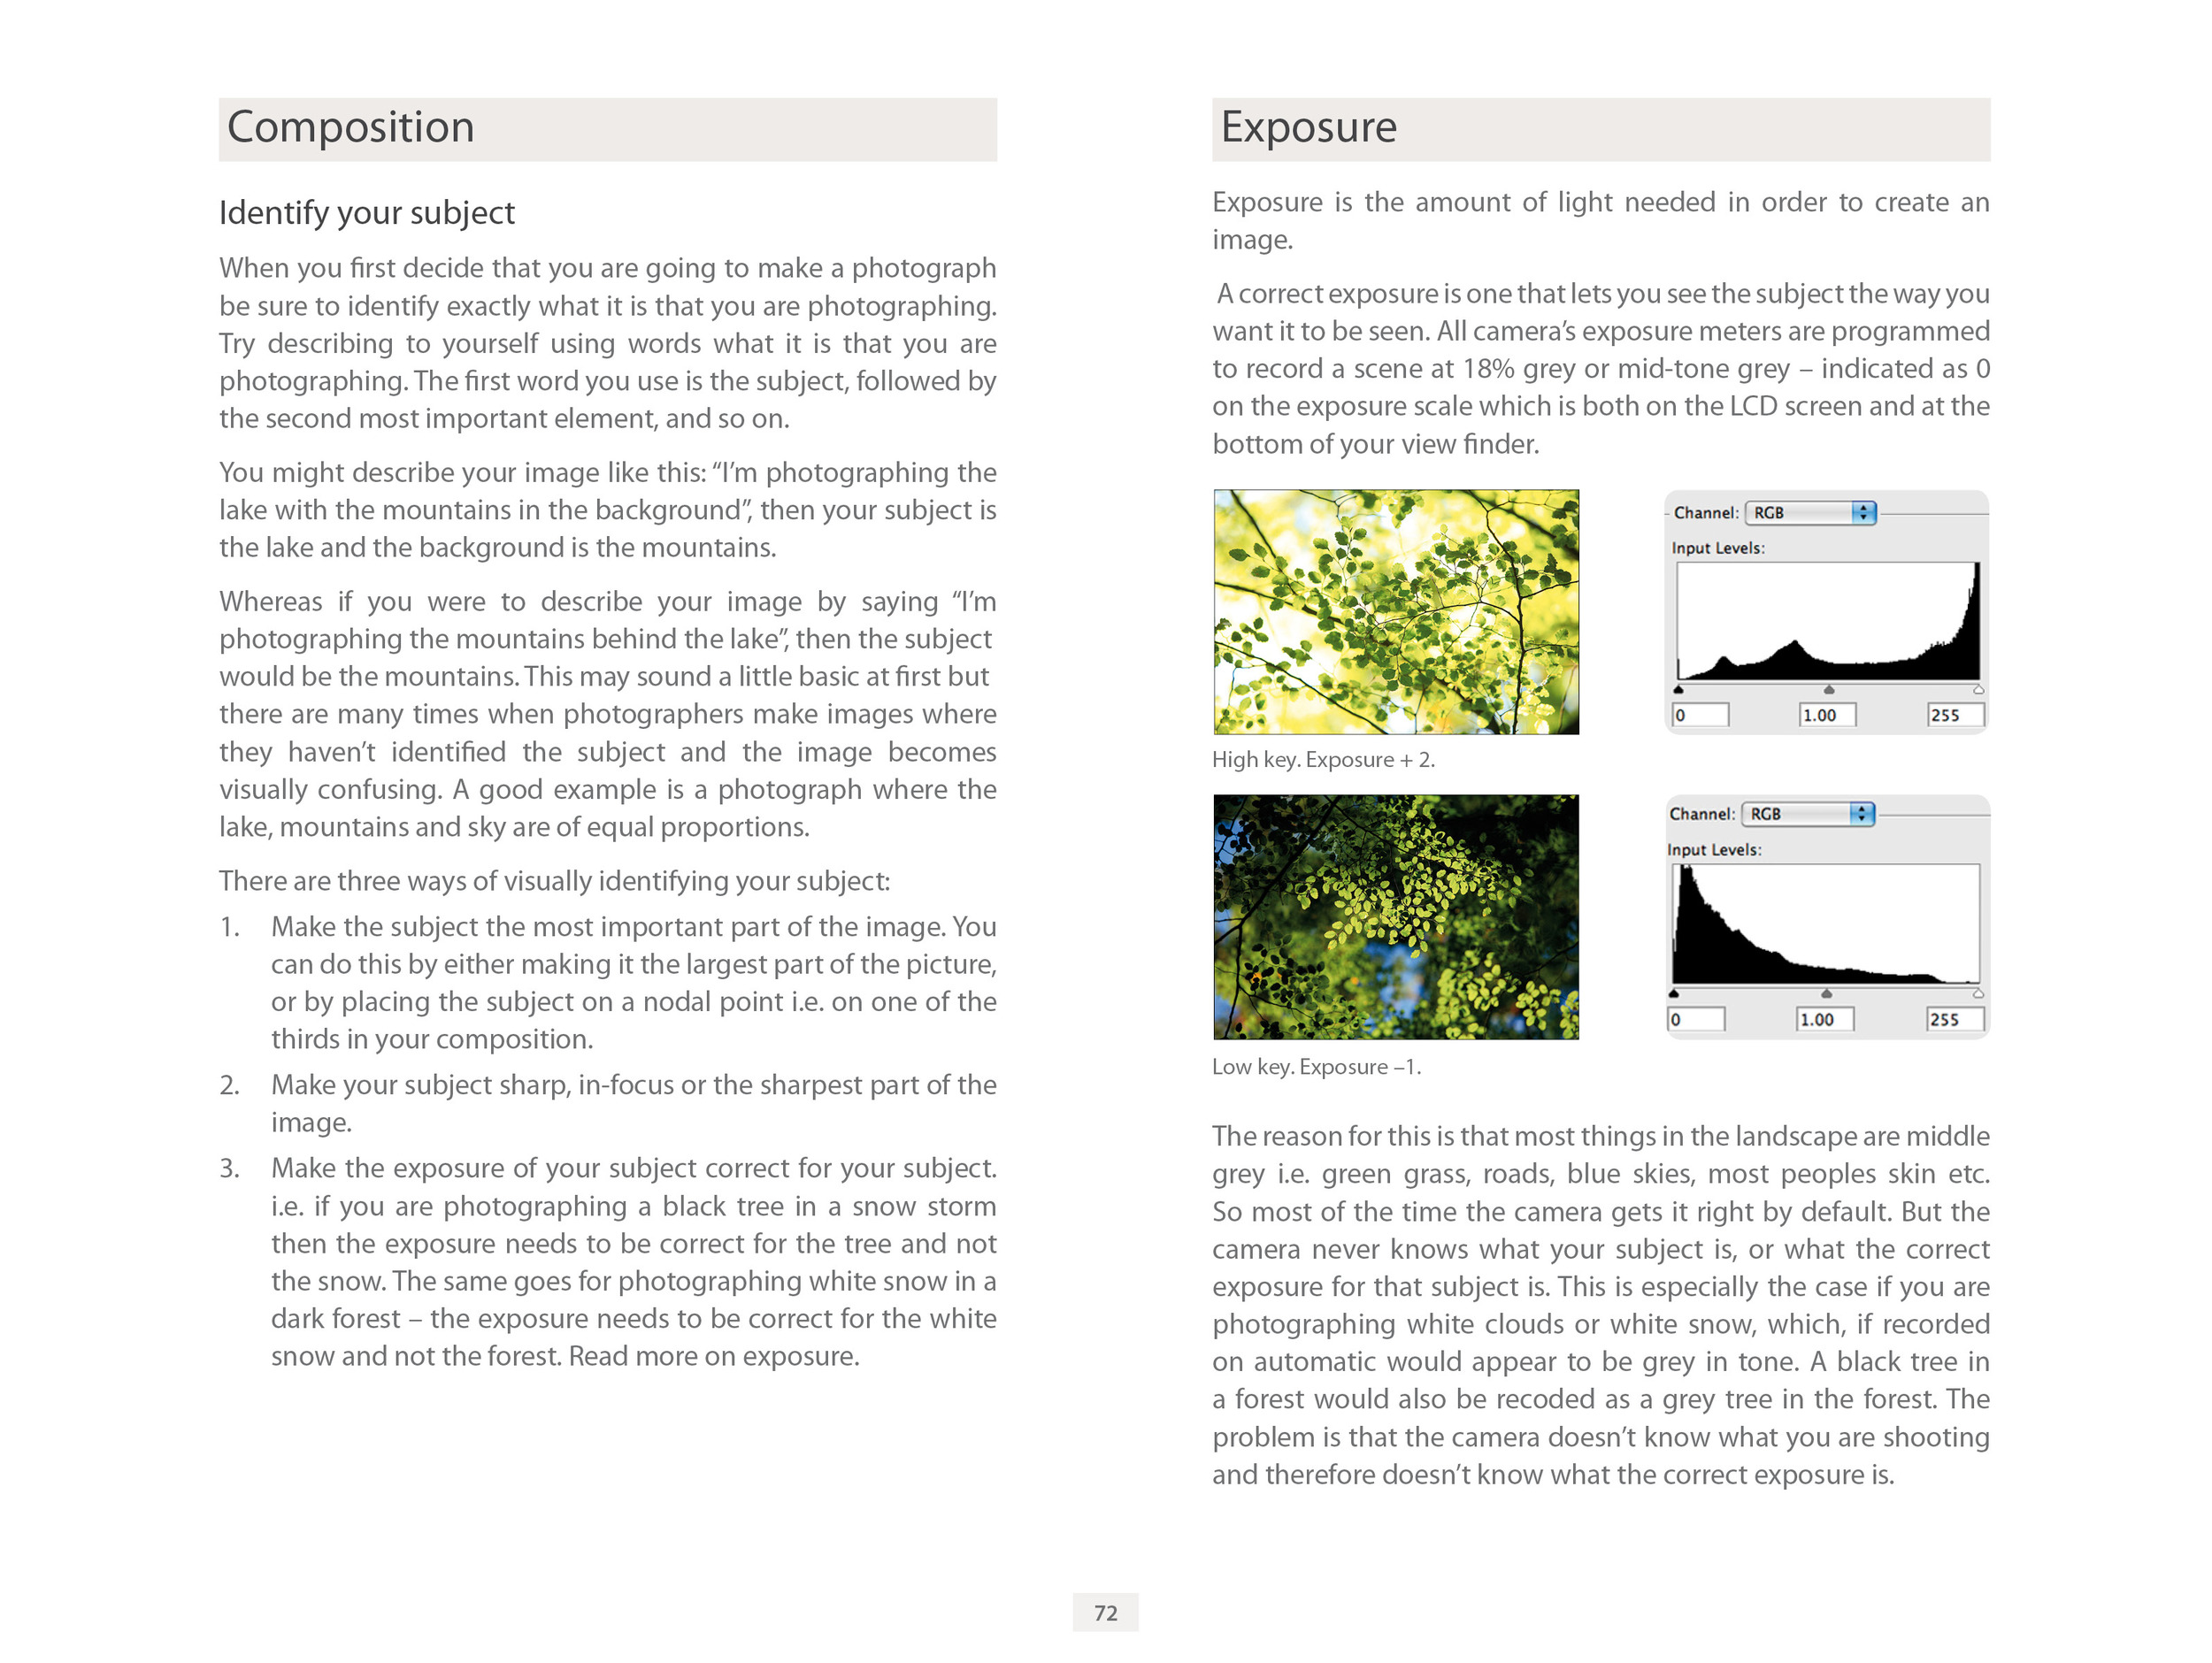 LG1 ebook for Flatbooks page 72 Composition & Exposure.jpg